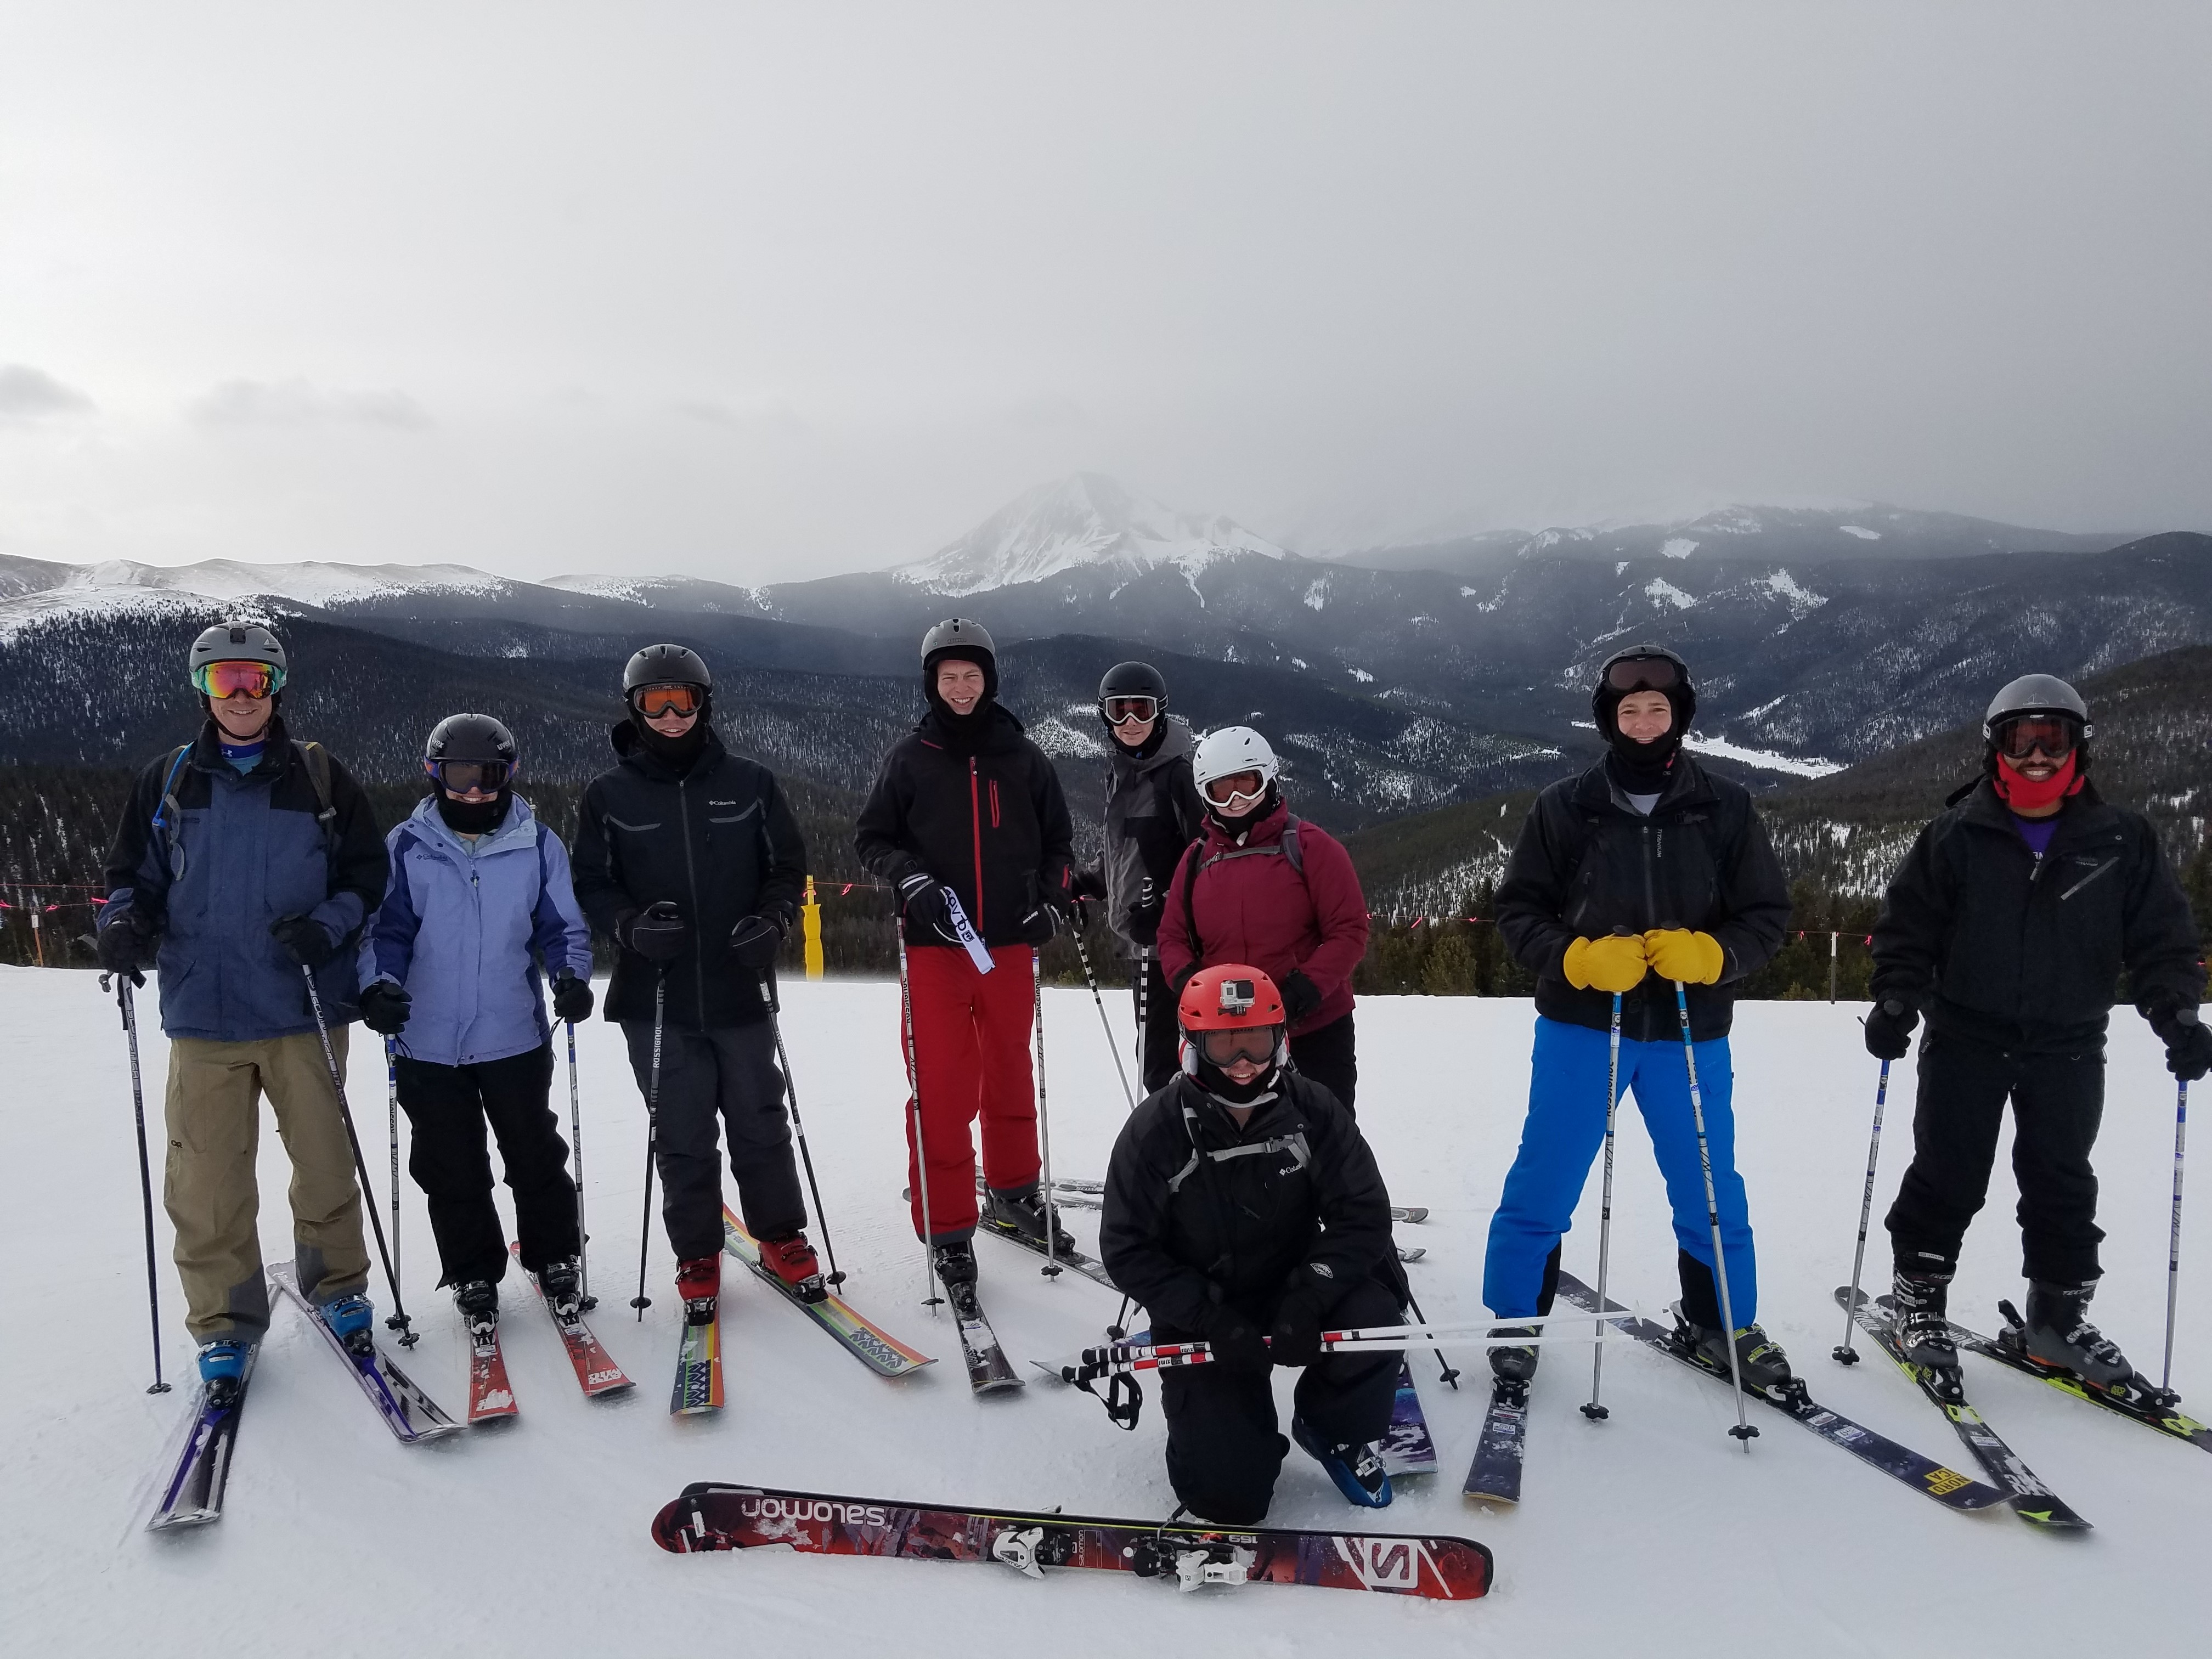 Group photo of DMCers at the top a mountain at Keystone.